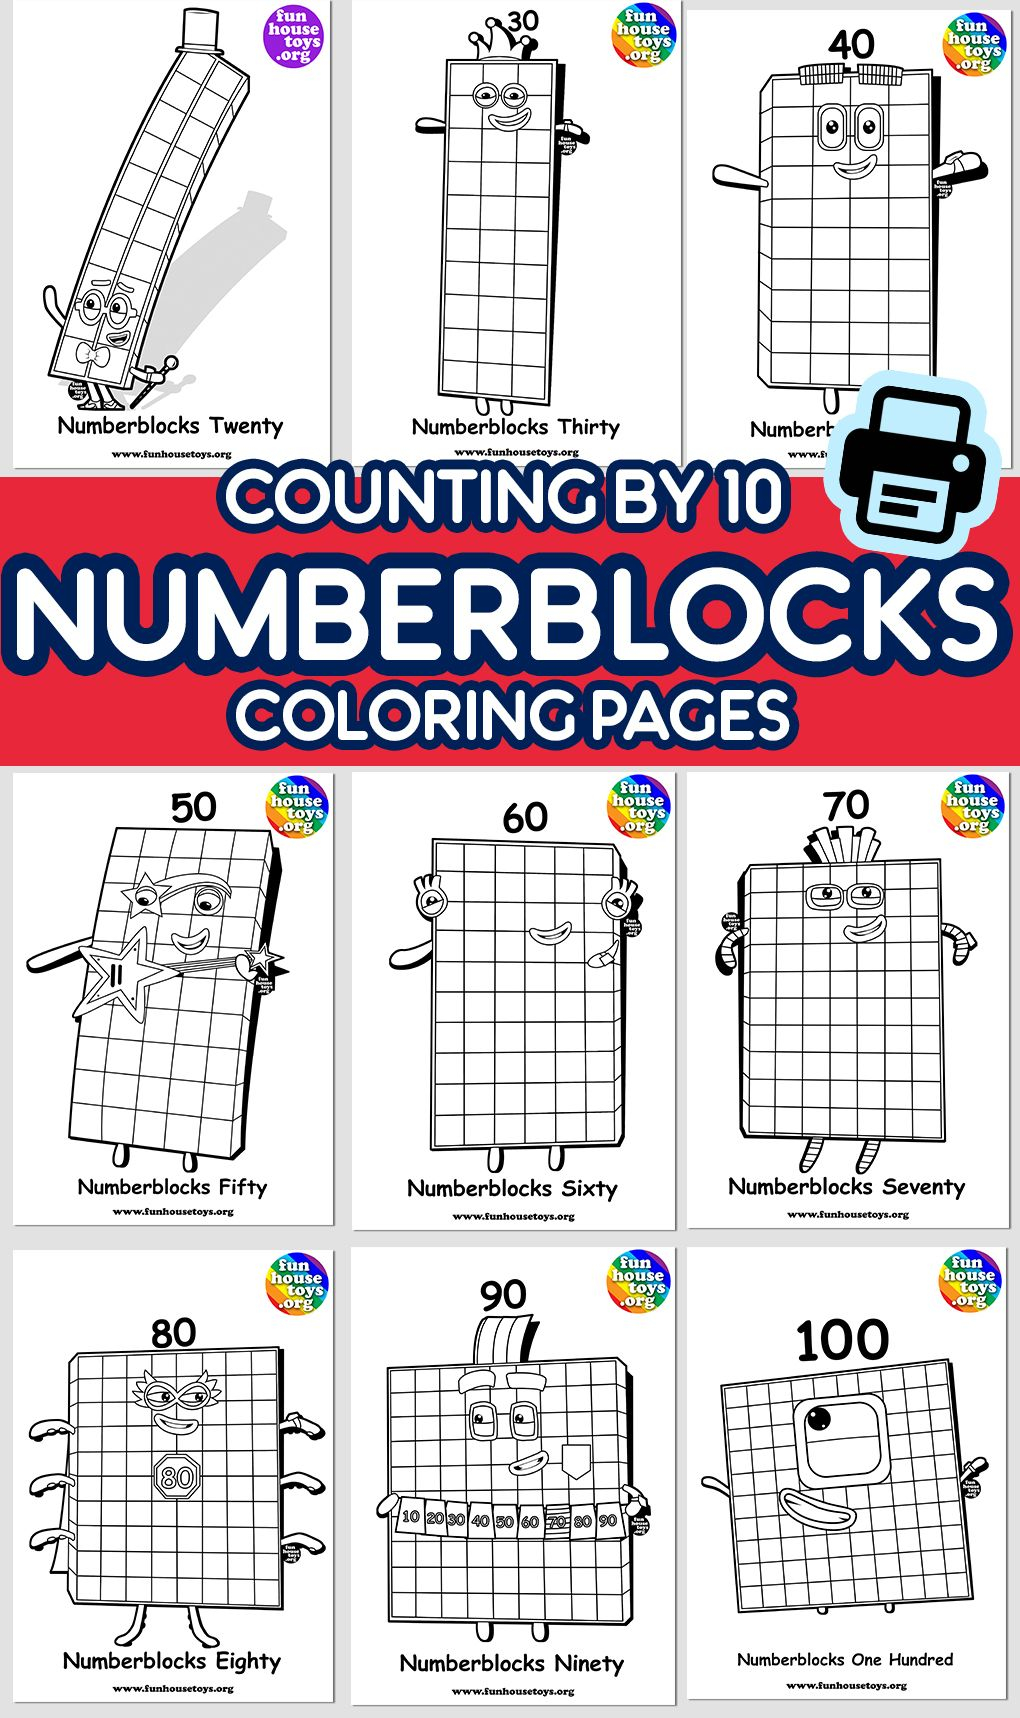 New Numberblocks 100 Available As Coloring Printable For 